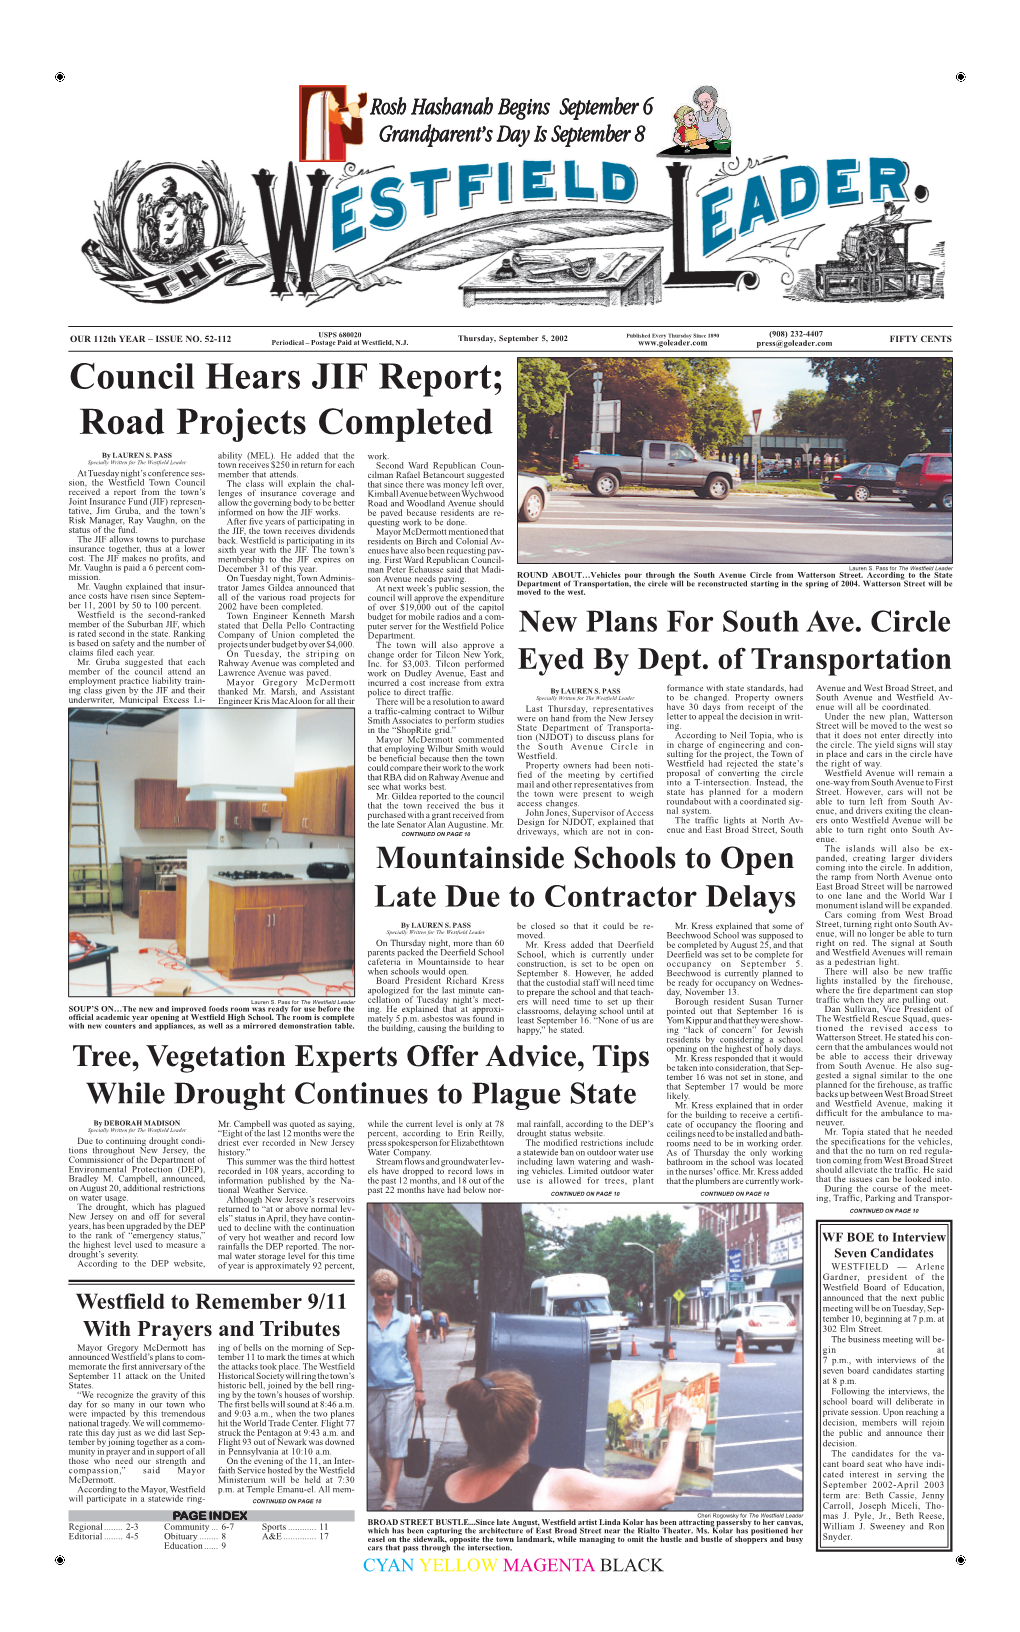 Council Hears JIF Report; Road Projects Completed